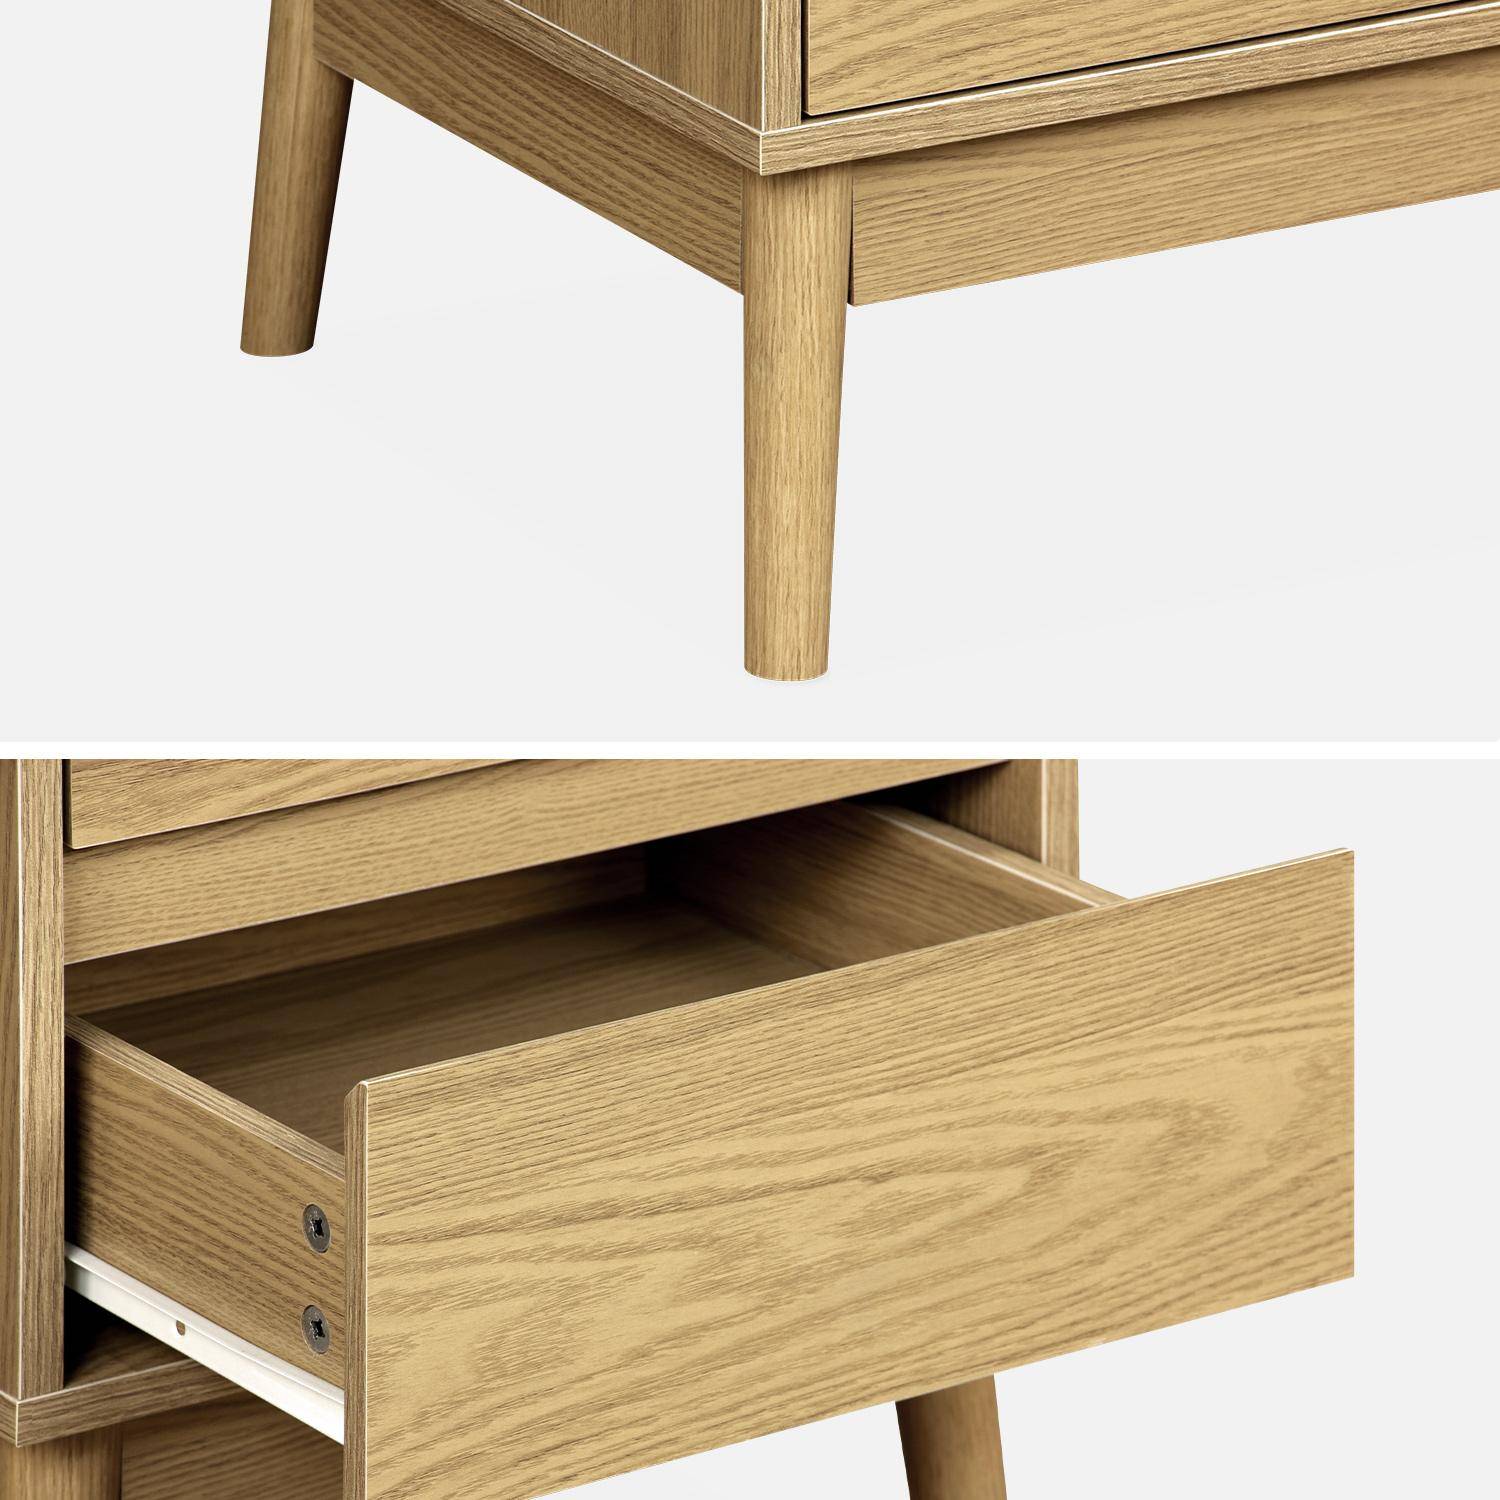 Pair of bedside tables with 2 drawers, 26x40x56cm - Dune - Natural Photo6